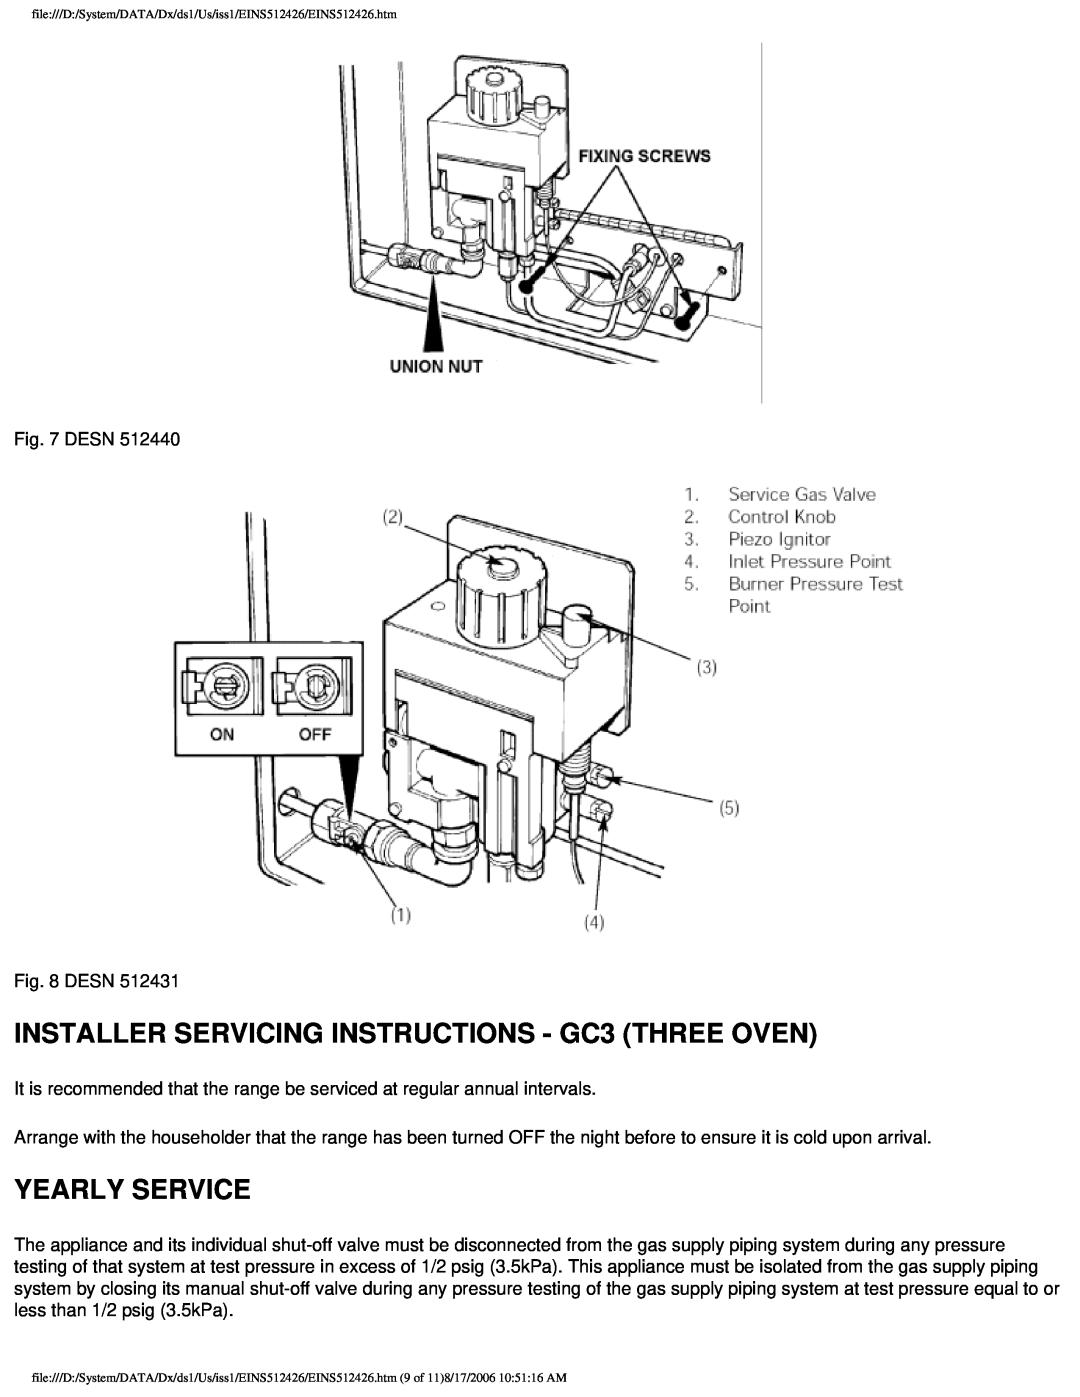 Aga Ranges GC 3 installation instructions INSTALLER SERVICING INSTRUCTIONS - GC3 THREE OVEN, Yearly Service 